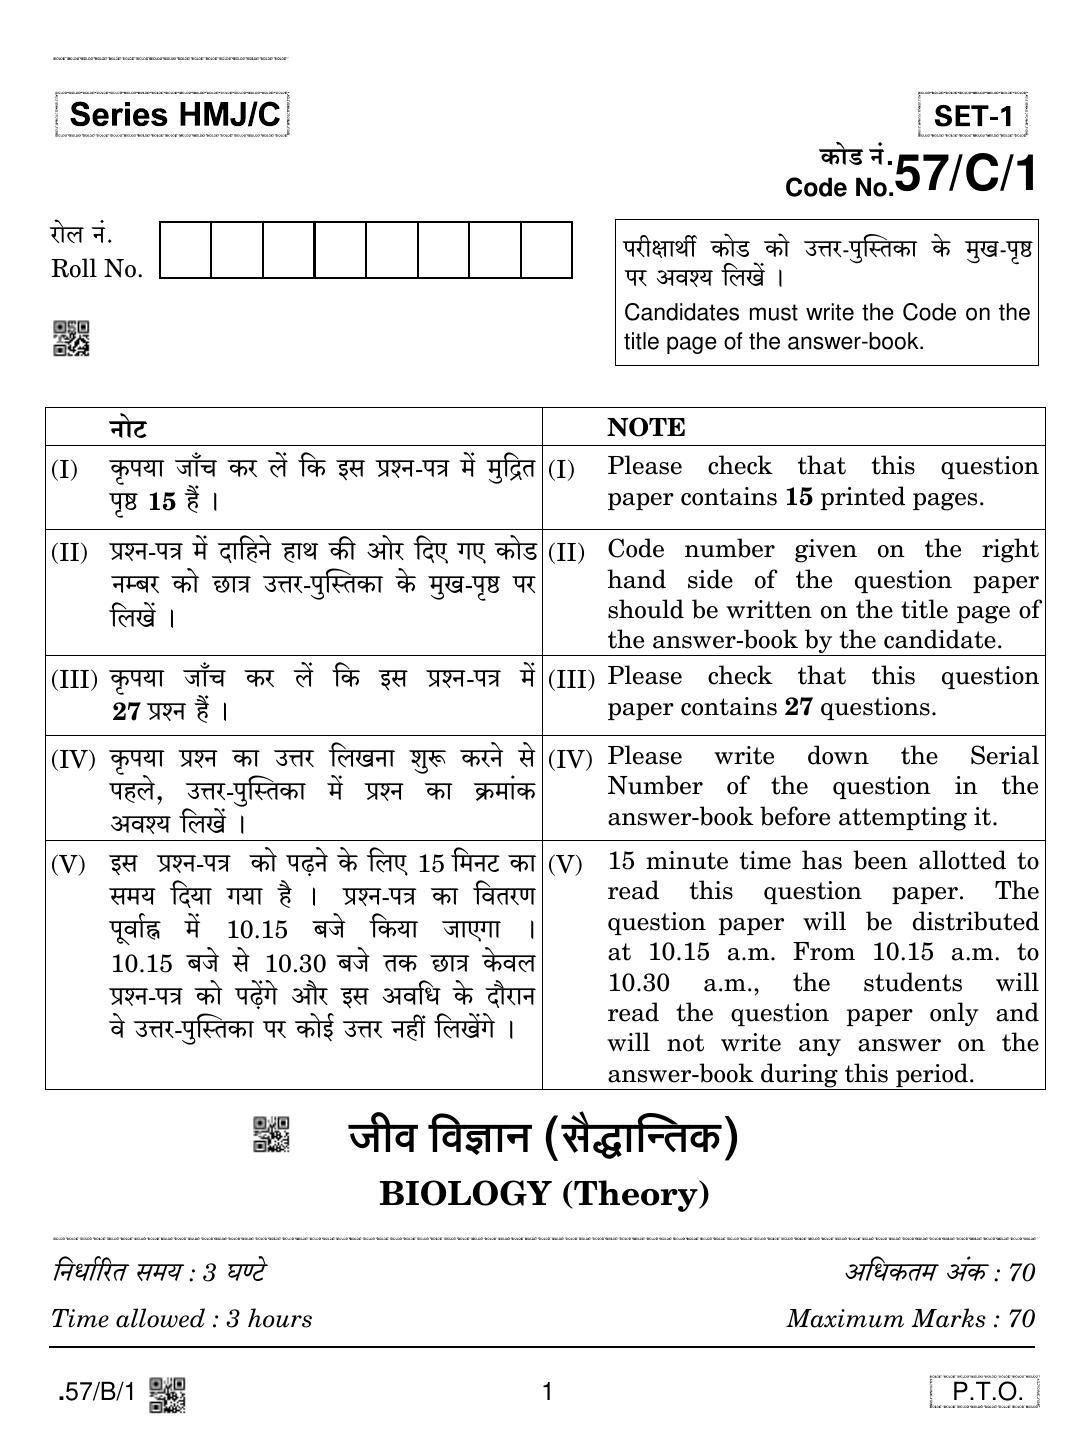 CBSE Class 12 57-C-1 - Biology 2020 Compartment Question Paper - Page 1